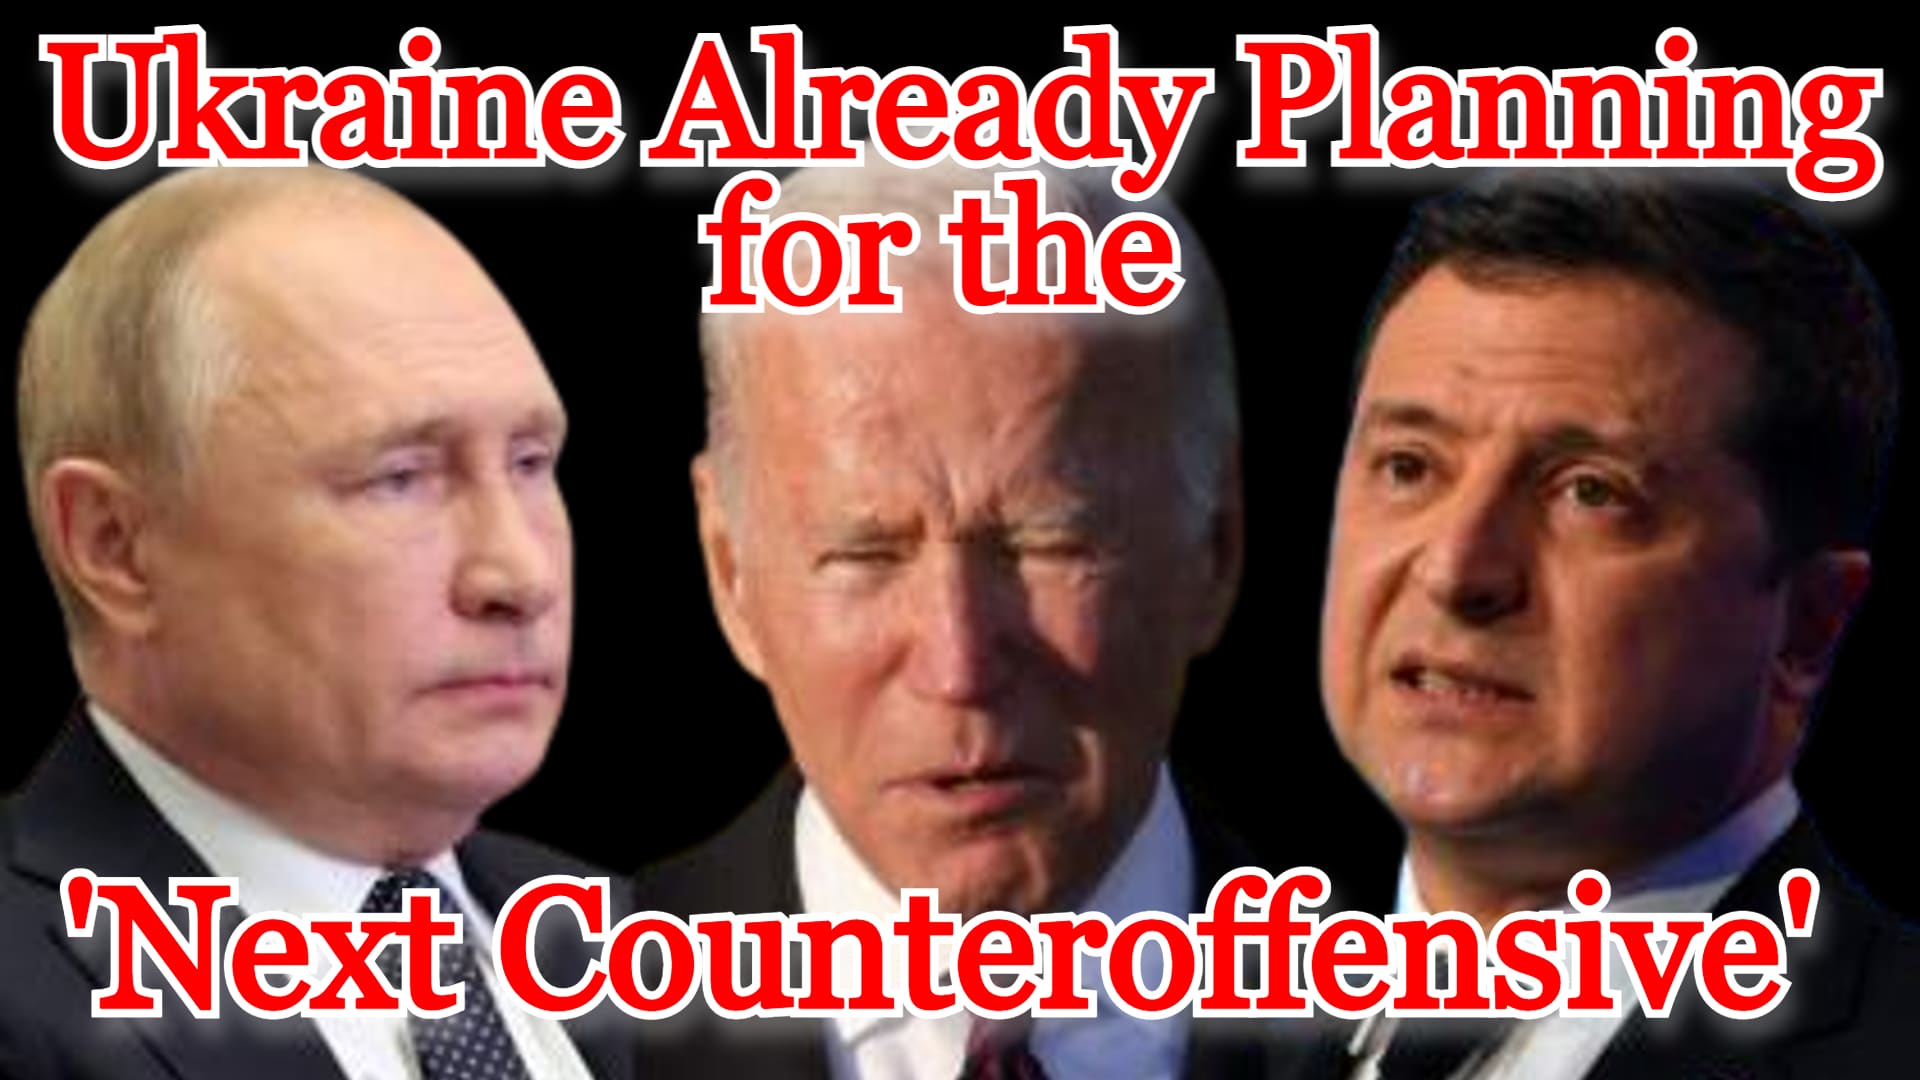 COI #420: Ukraine Already Planning for the ‘Next Counteroffensive’